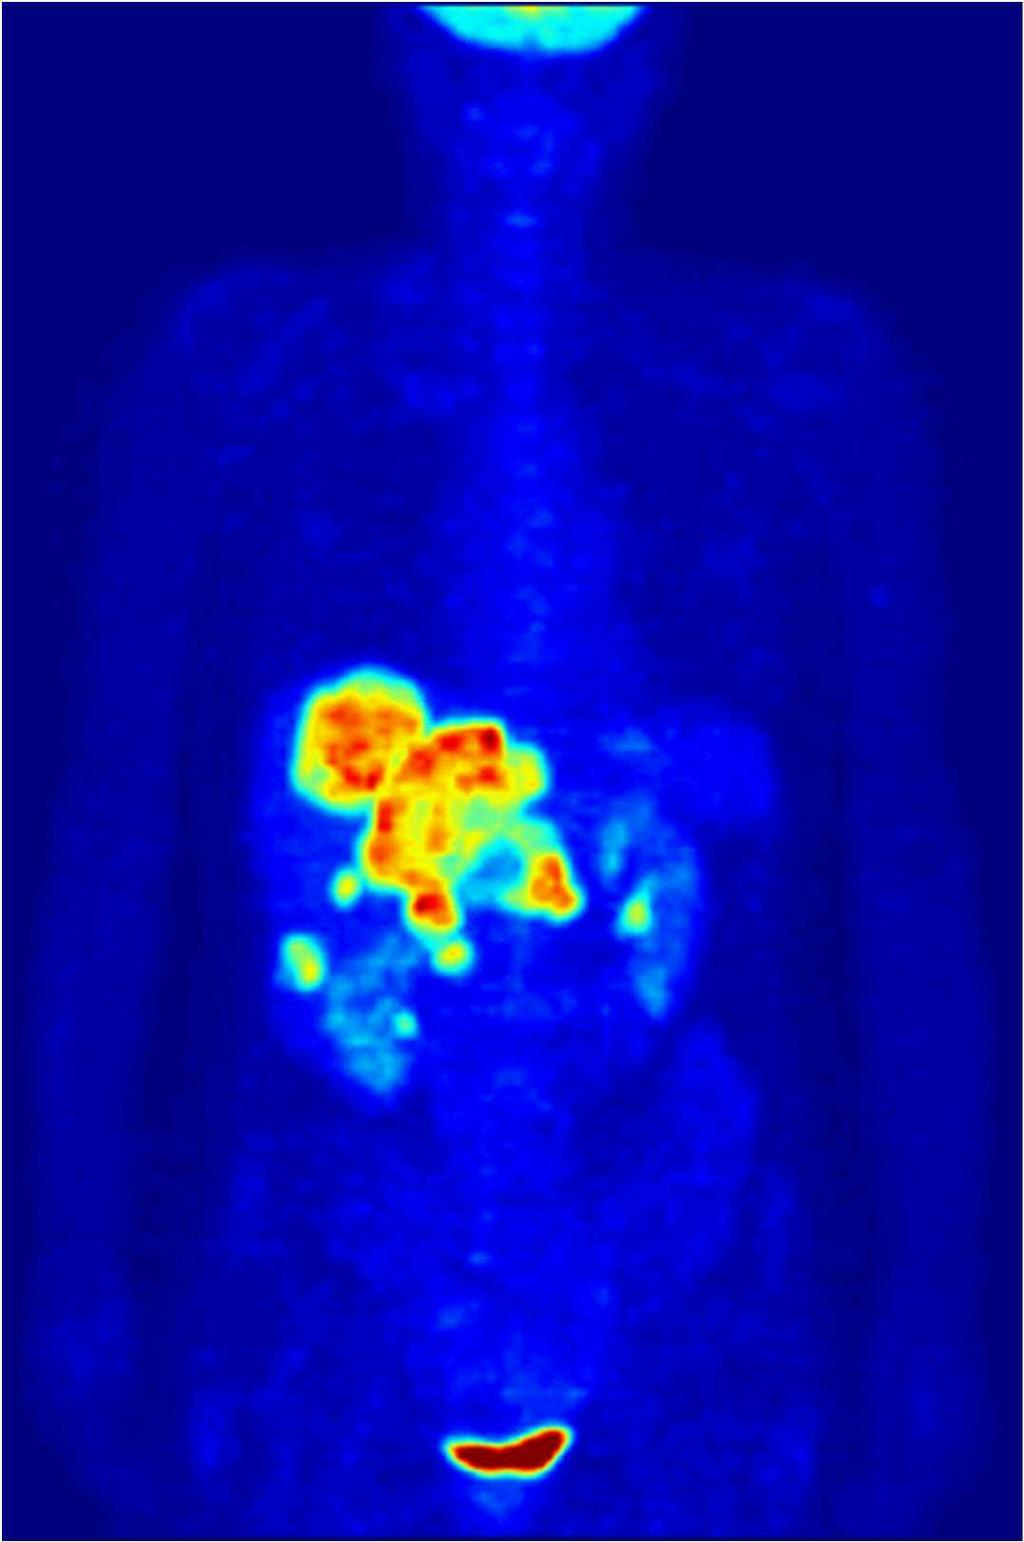 (animation) Maximum Intensity Projection (MIP) of a wholebody positron emission tomography (PET) acquisition of a 79 kg (174 lb) weighting female after intravenous injection of 371 MBq of 18 F-FDG